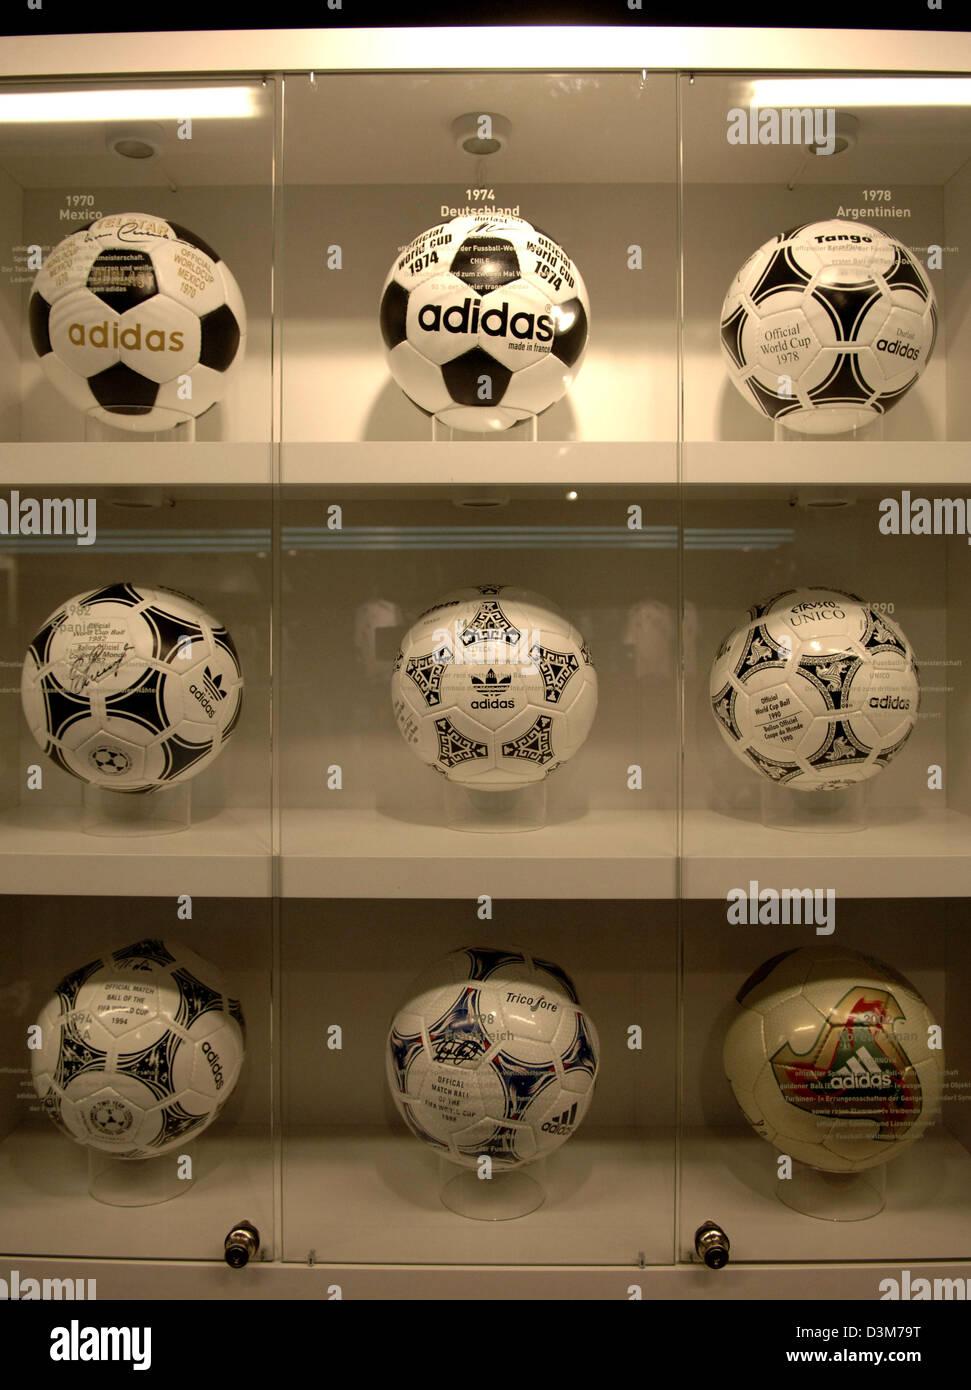 dpa) - All of the previous official World Cup soccer balls, which sporting goods manufacturer adidas has produced, are on display in a showcase at the Karstadt Game Sports store in